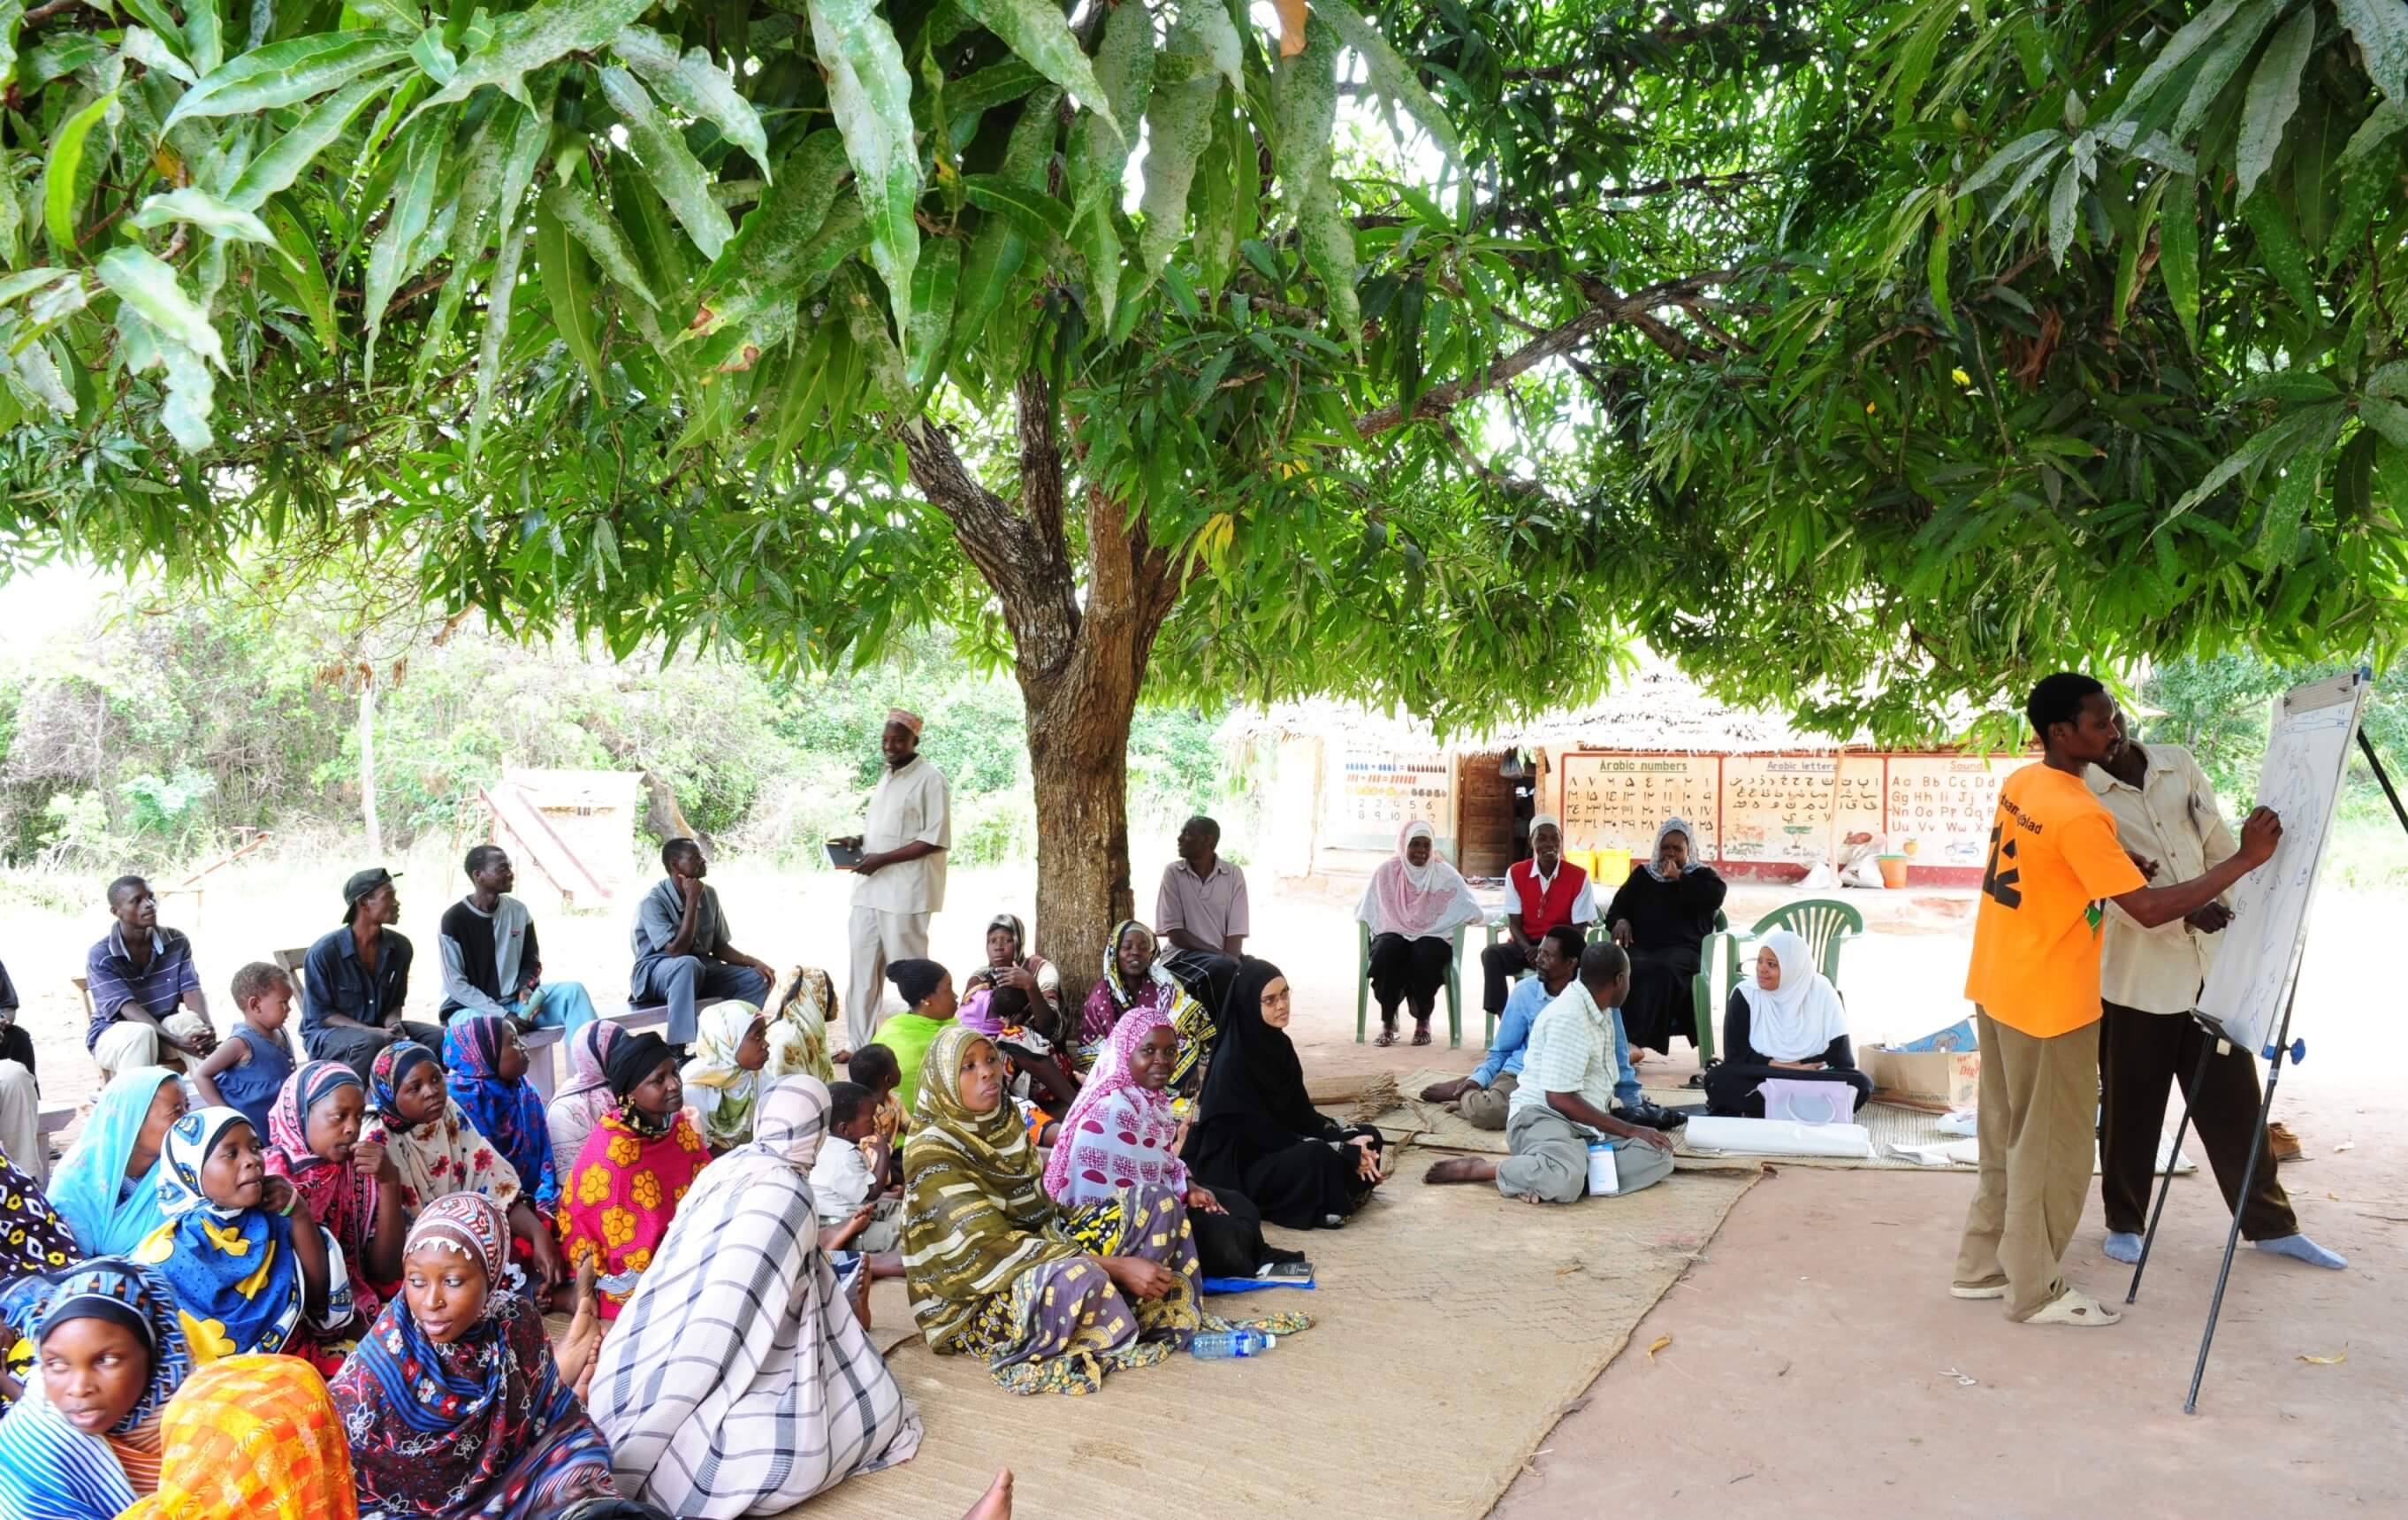 A community group in Kenya meets to discuss educational needs